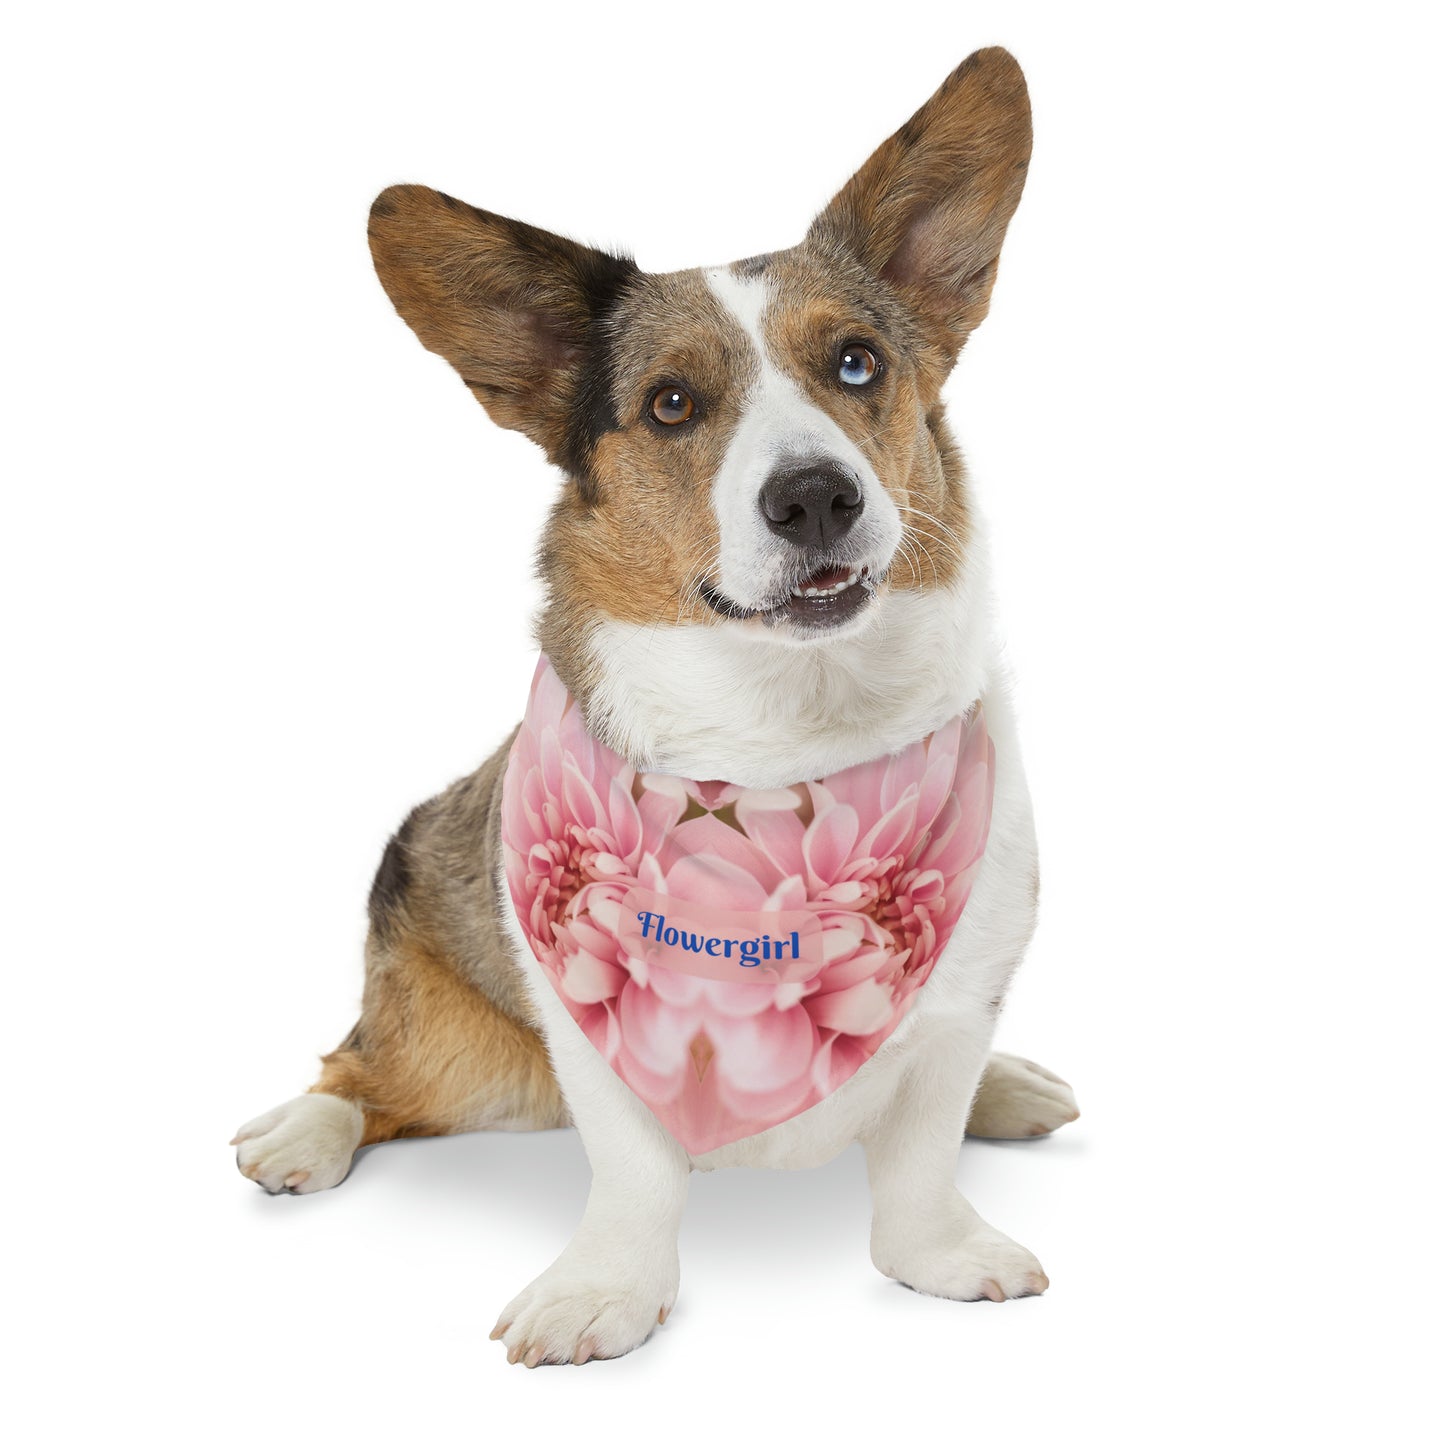 Bridal Bandana COLLAR, Pink Floral "Flowergirl" Sublimation Design, Engagement Parties, Weddings, Mother of the Bride Gift